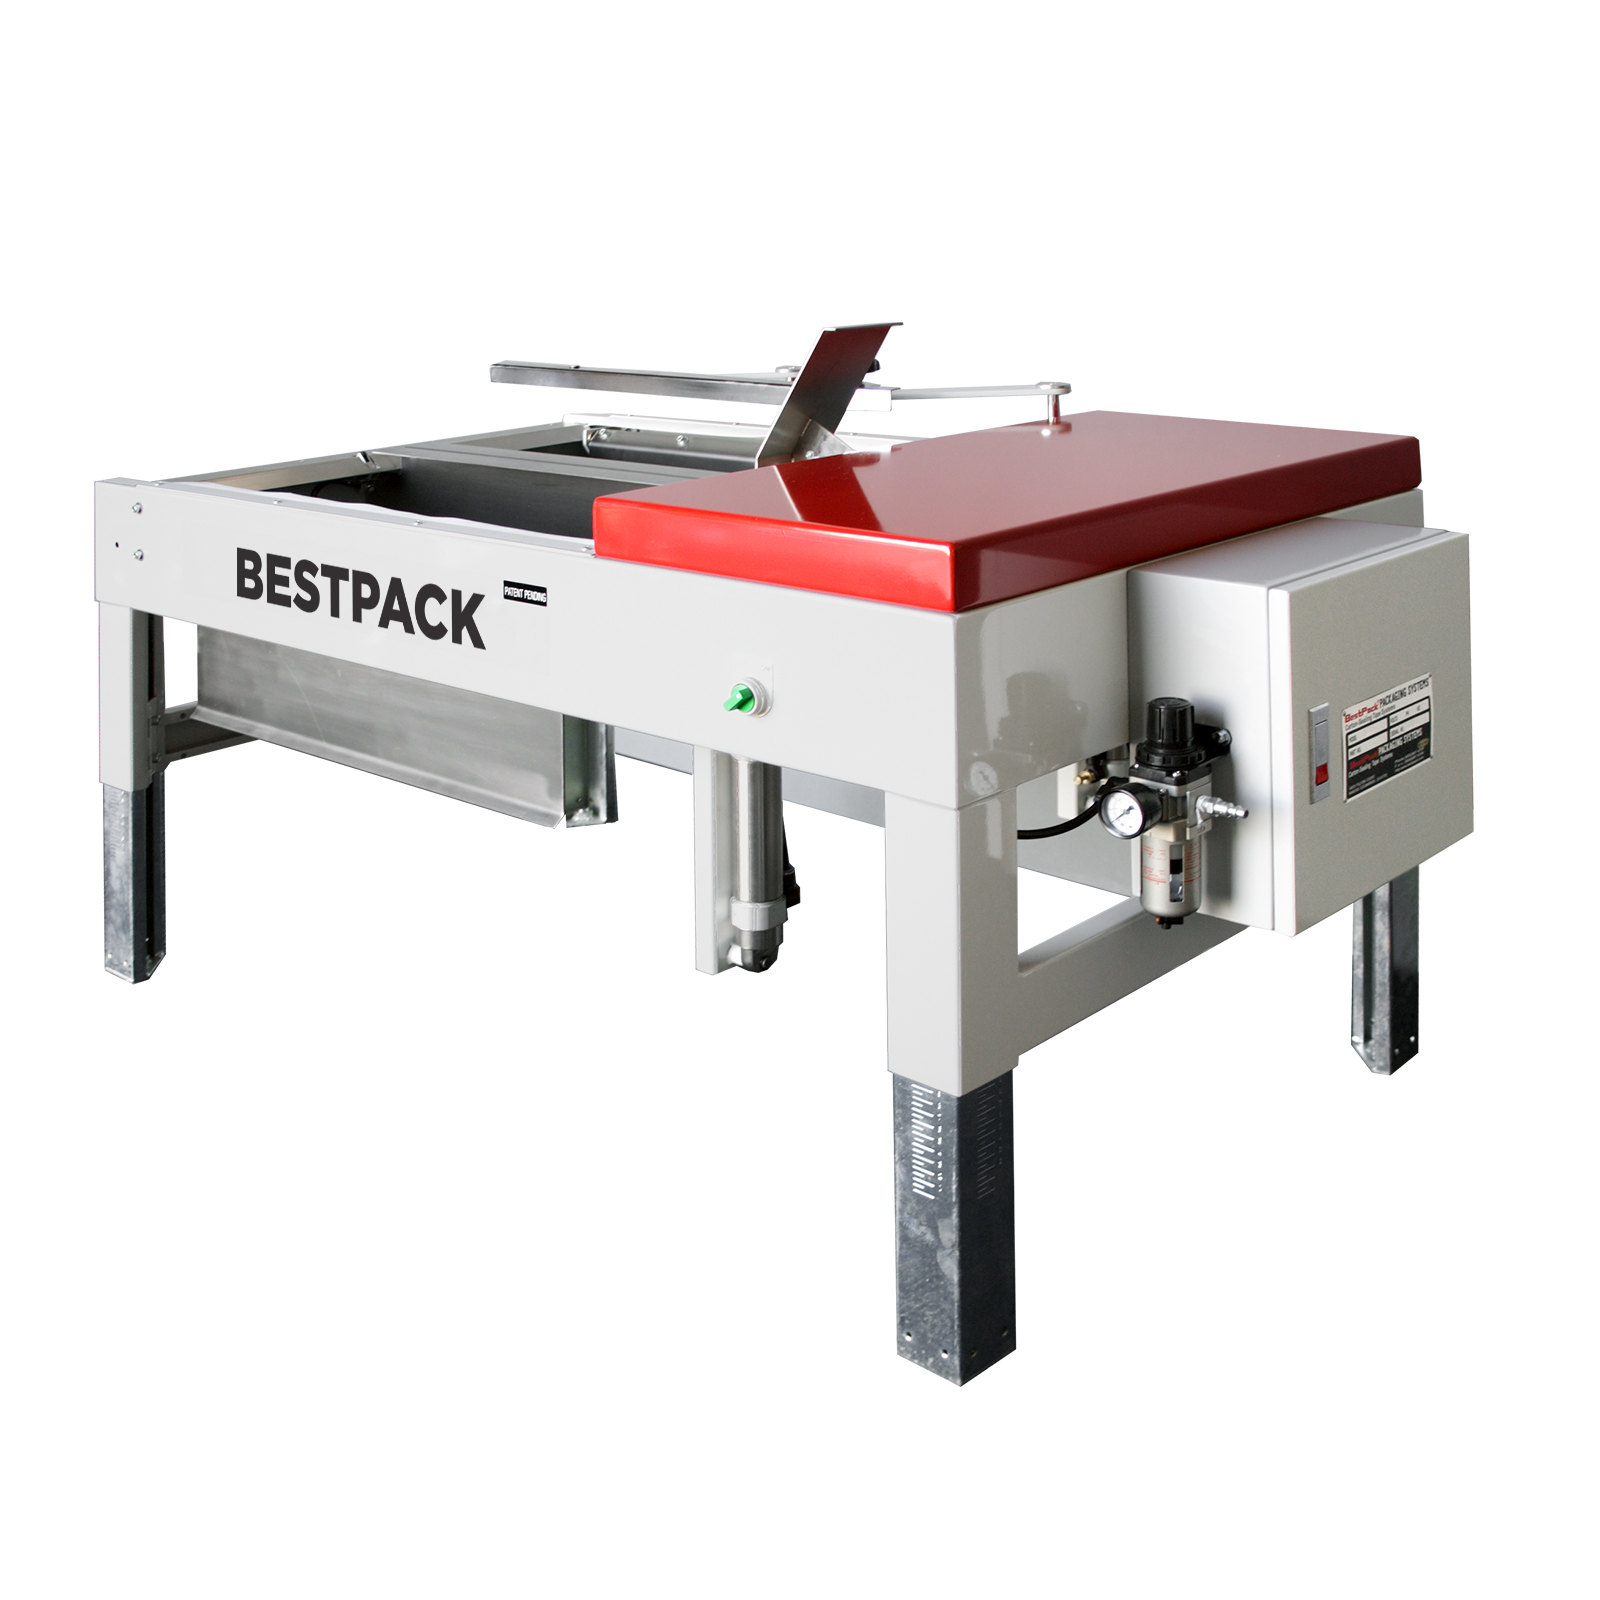 An image of the BestPack MBF packaging station